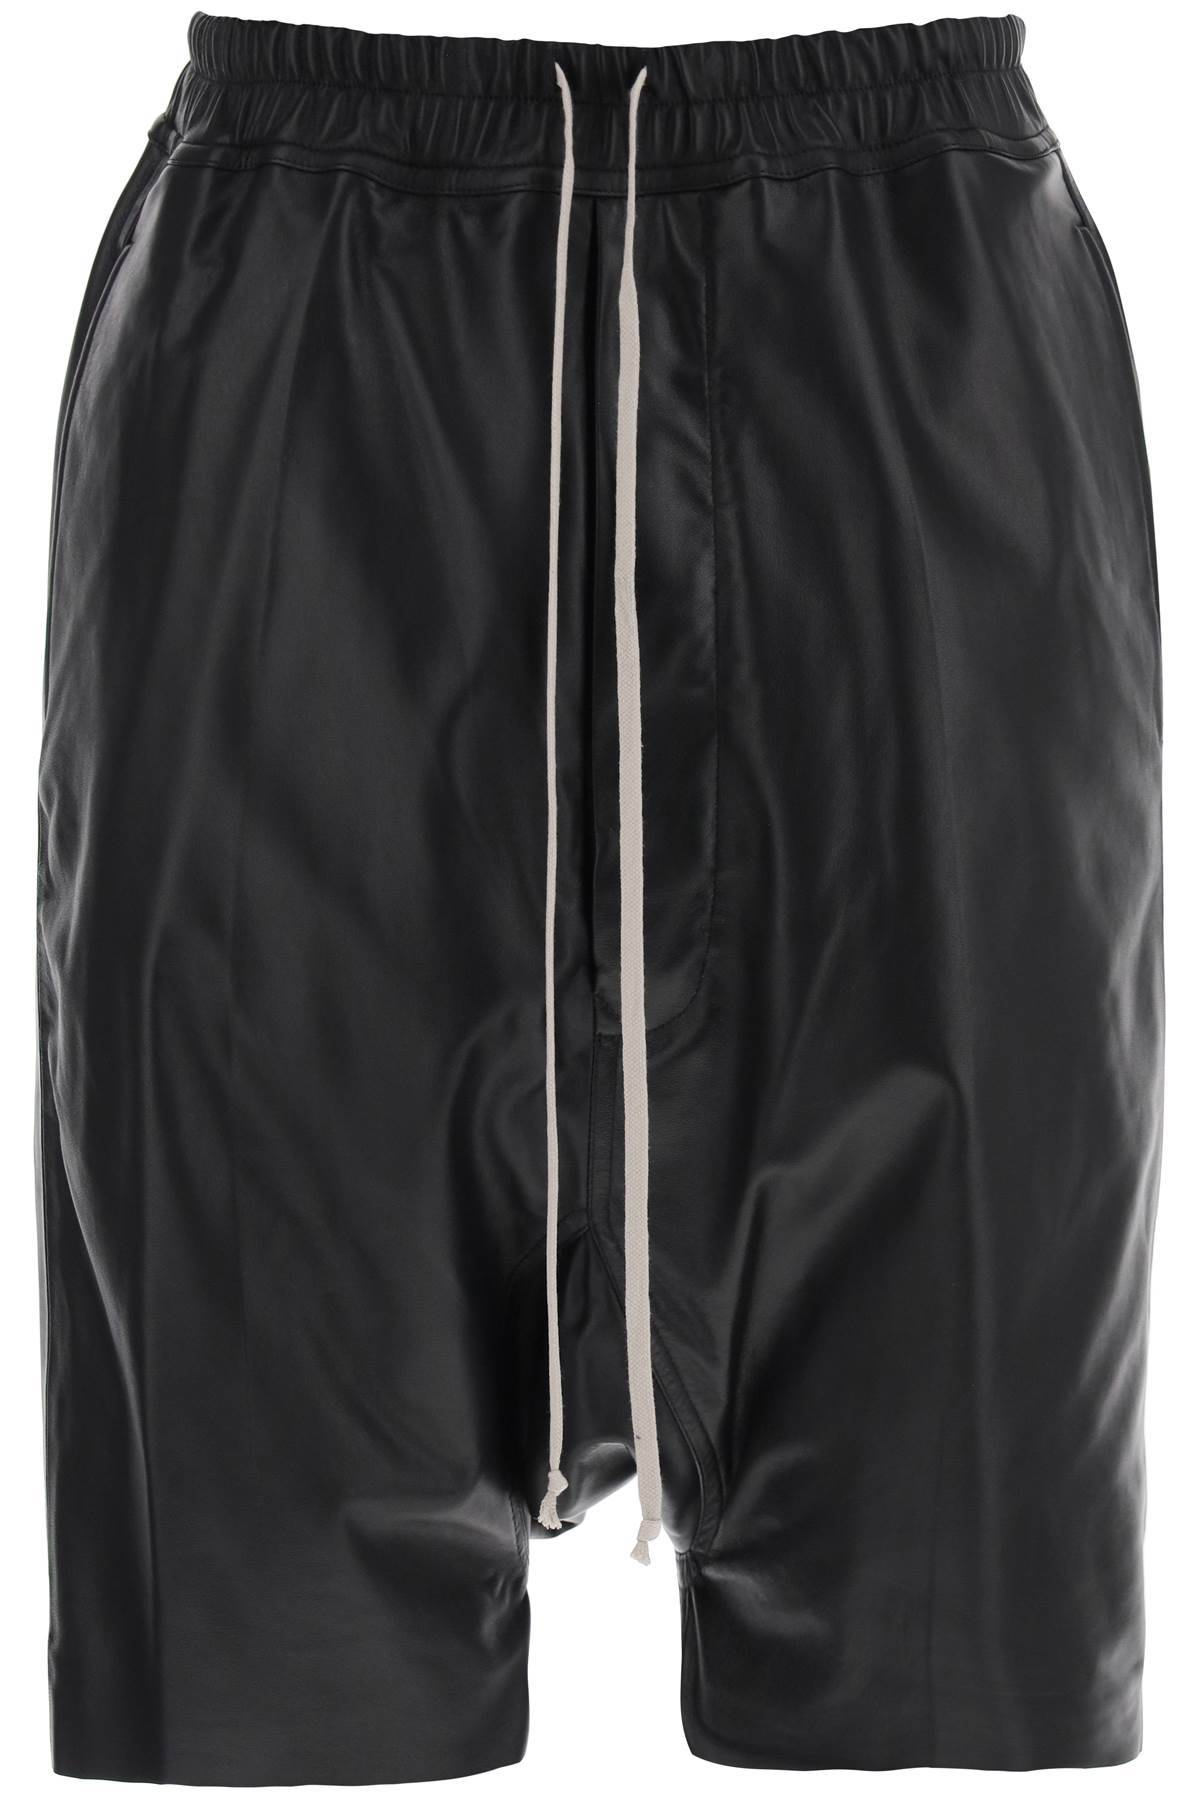 Rick Owens RICK OWENS leather bermuda shorts for